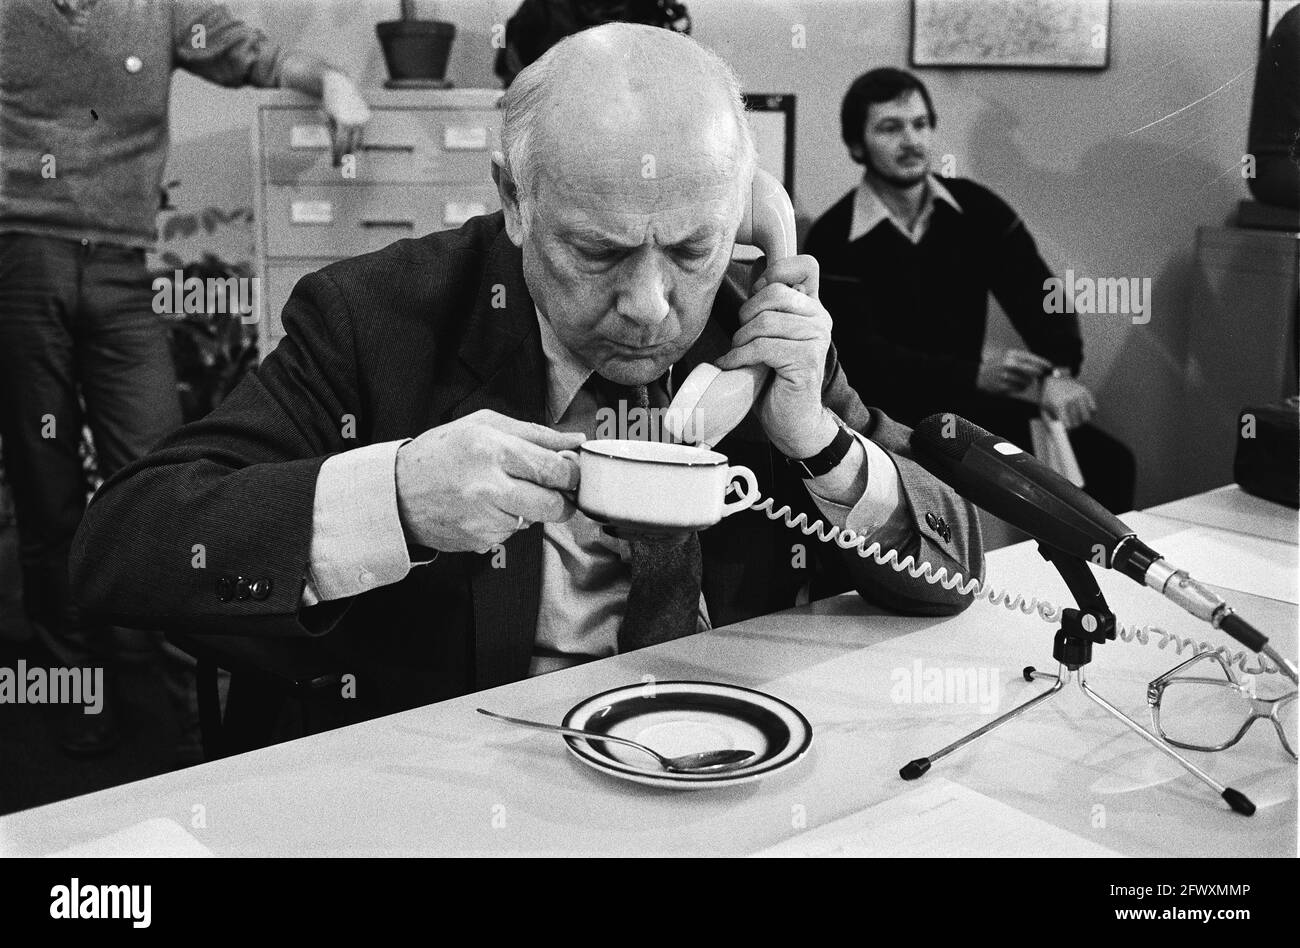 PvdA top answers members by phone in party office of PvdA in Amsterdam. Den Uyl on the phone with a cup of soup, March 11, 1982, ministers, political Stock Photo